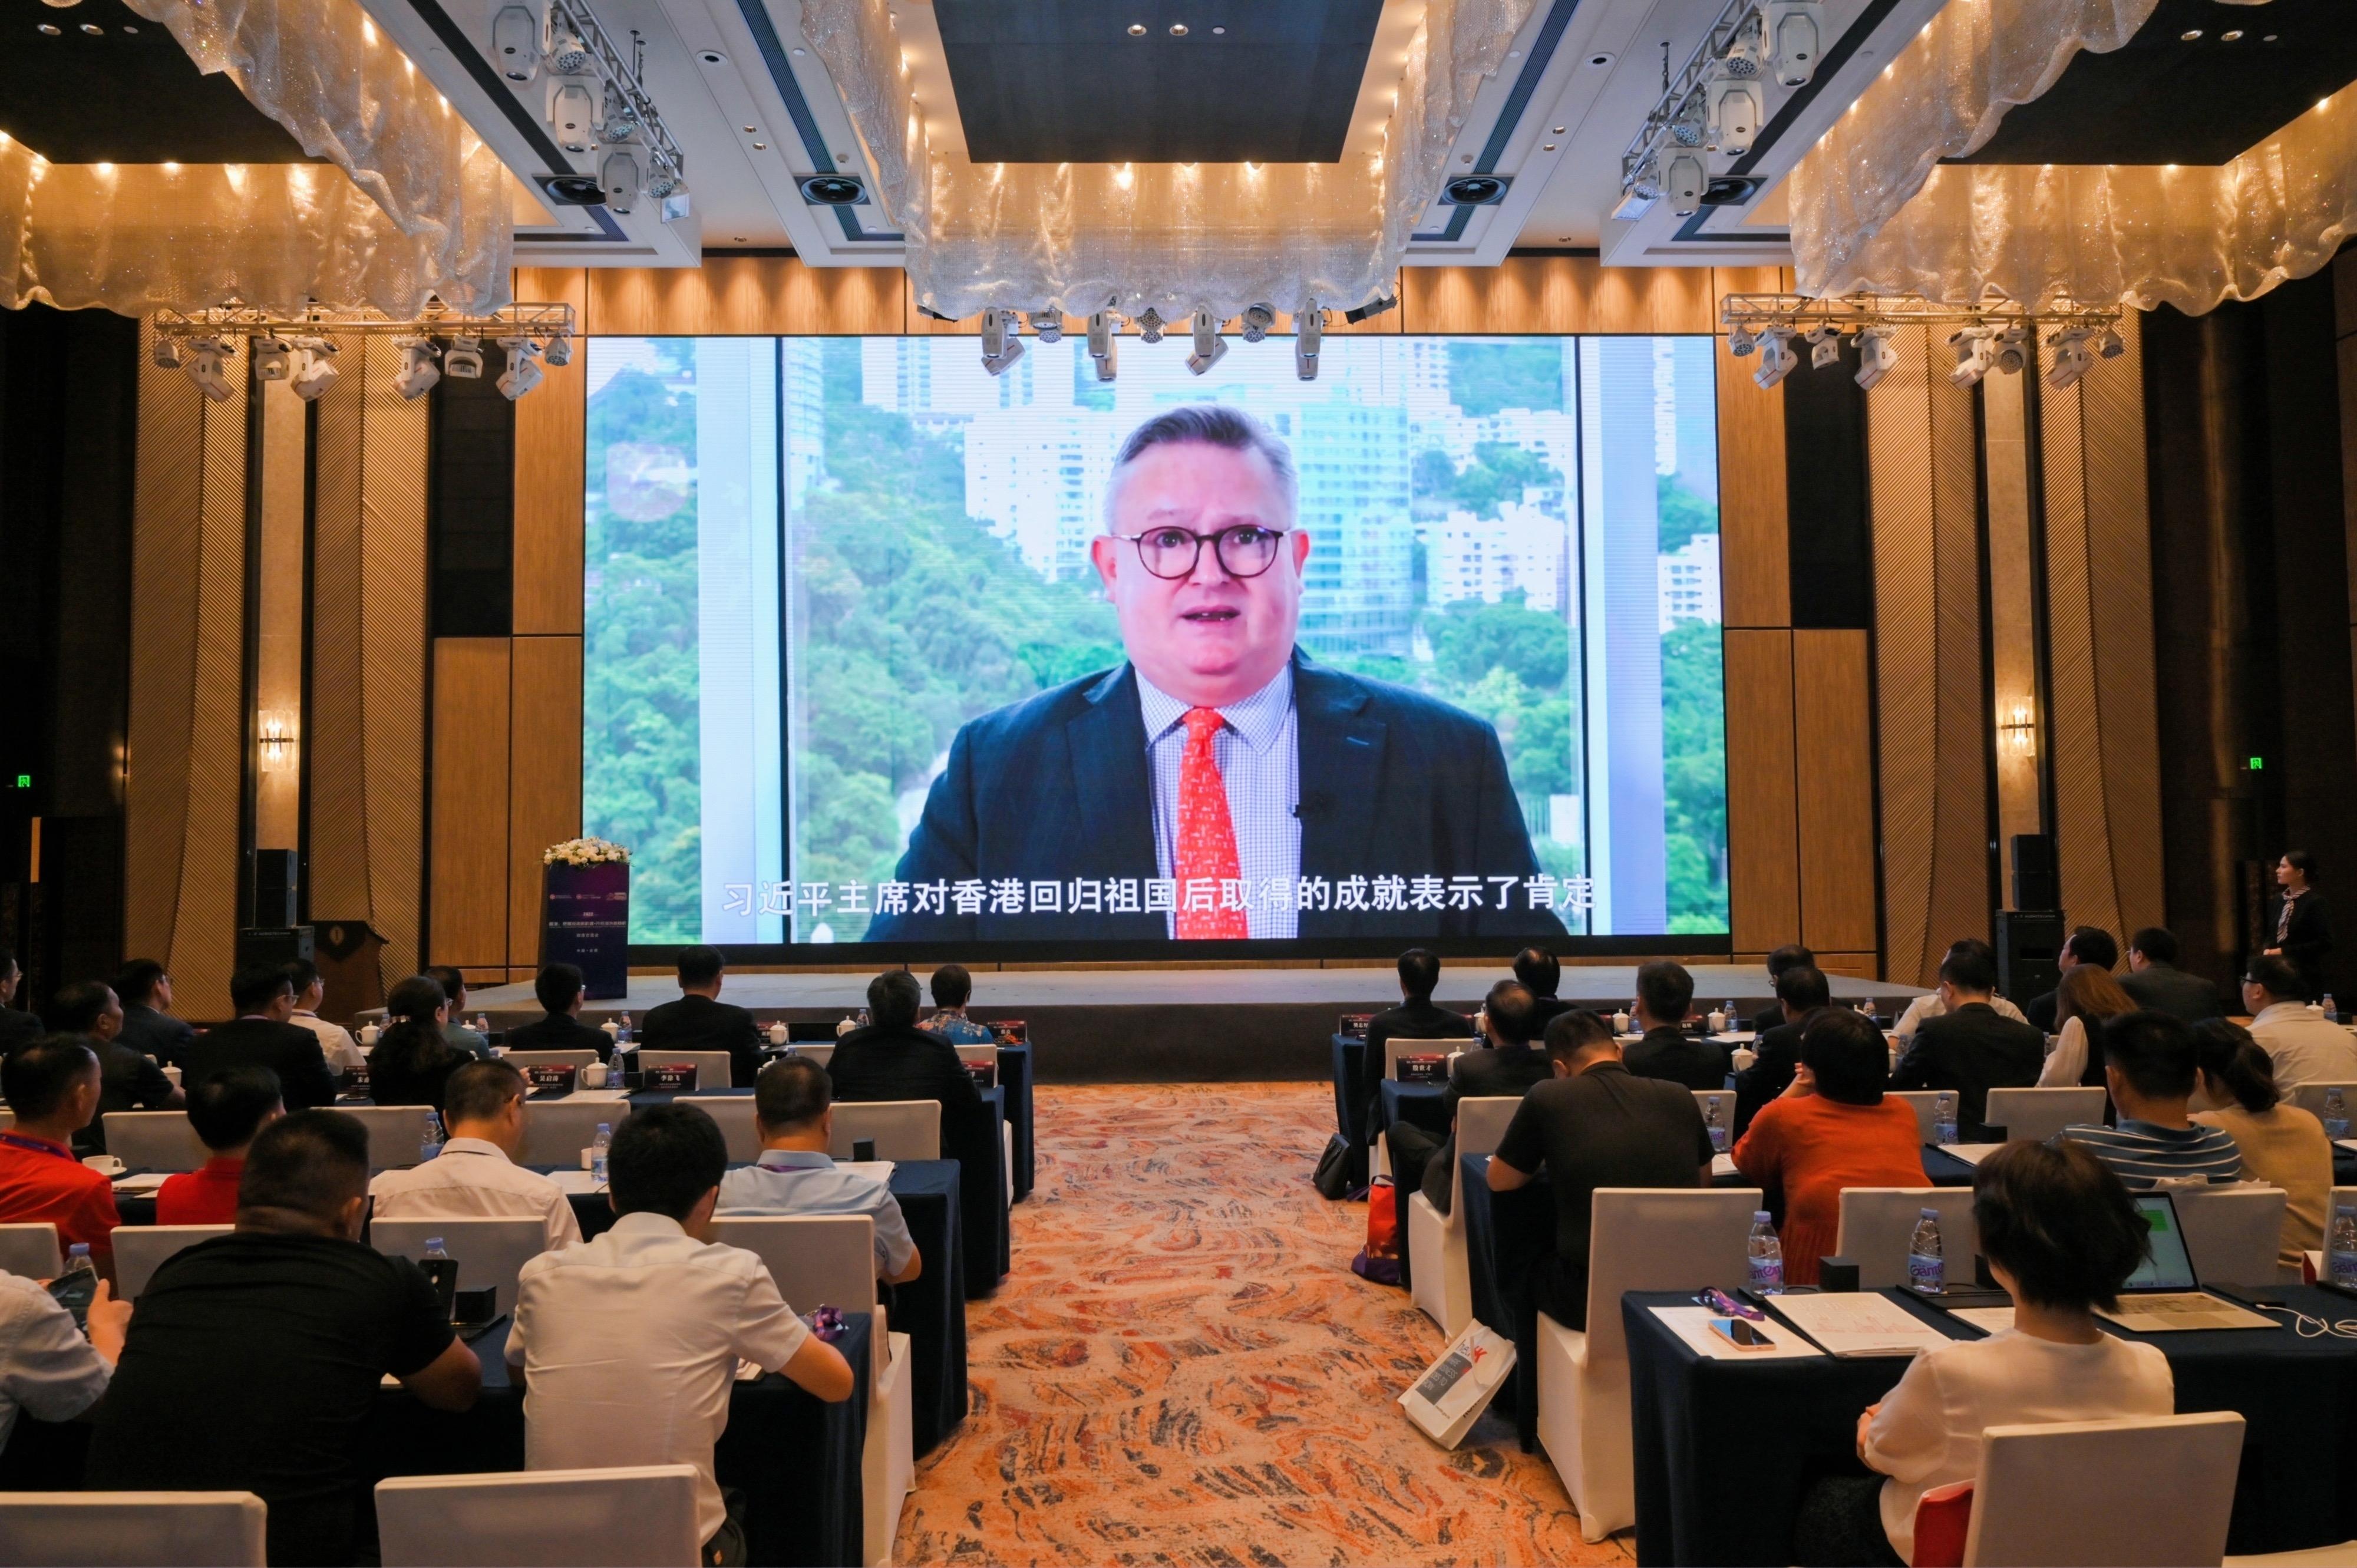 The Hong Kong Special Administrative Region Government and the People's Government of Anhui Province hosted a "Hong Kong - Unparalleled Opportunities to Expand Your Global Business" joint seminar in Hefei, Anhui Province, today (August 8). Photo shows the Director-General of Investment Promotion at Invest Hong Kong, Mr Stephen Phillips, encouraging local enterprises to leverage Hong Kong's business advantages to accelerate their overseas expansion under the National 14th Five-Year Plan, via recorded video.  